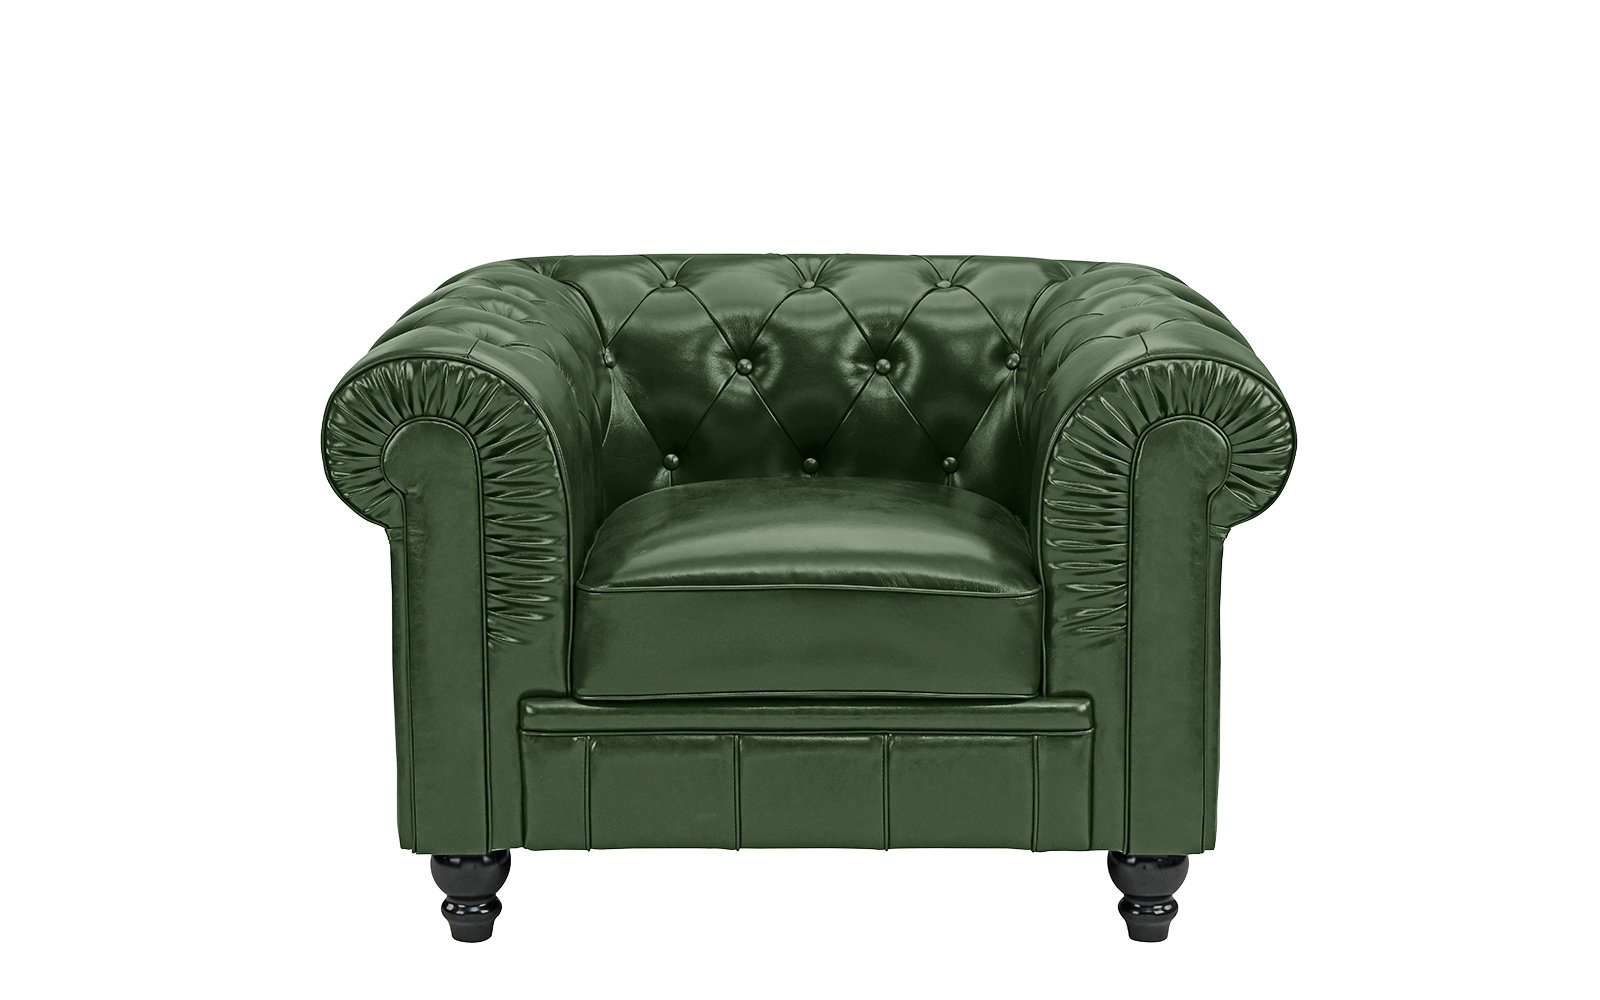 Classic Chesterfield Scroll Arm Tufted Leather Match